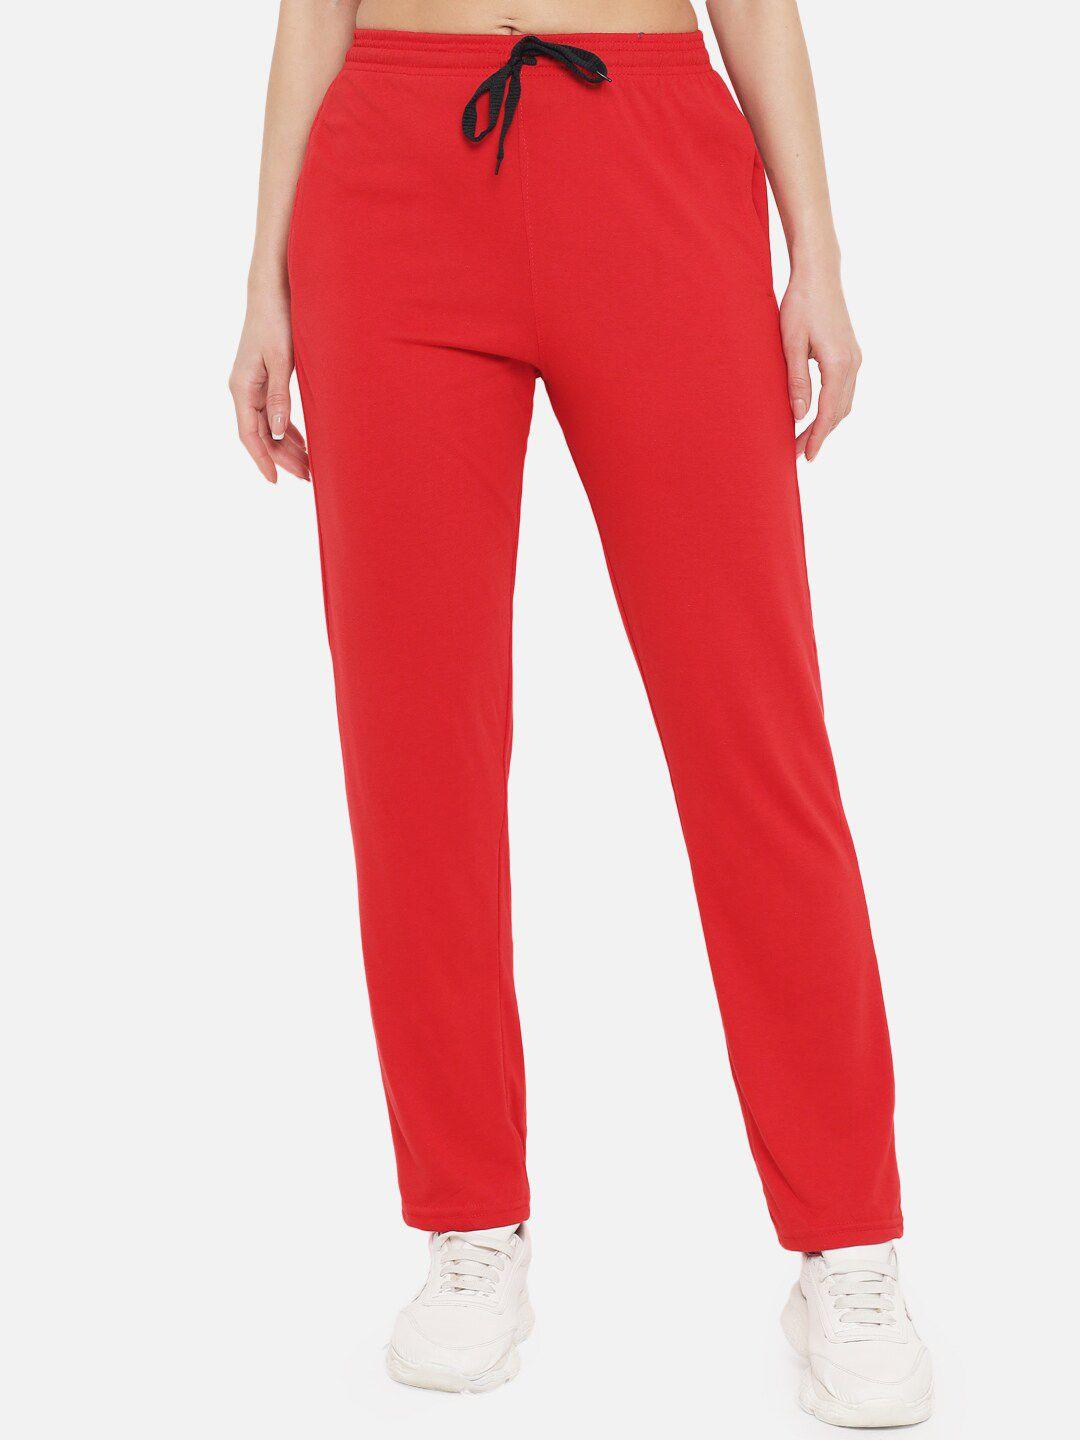 fflirtygo-women-red-relaxed-fit-solid-cotton-track-pants